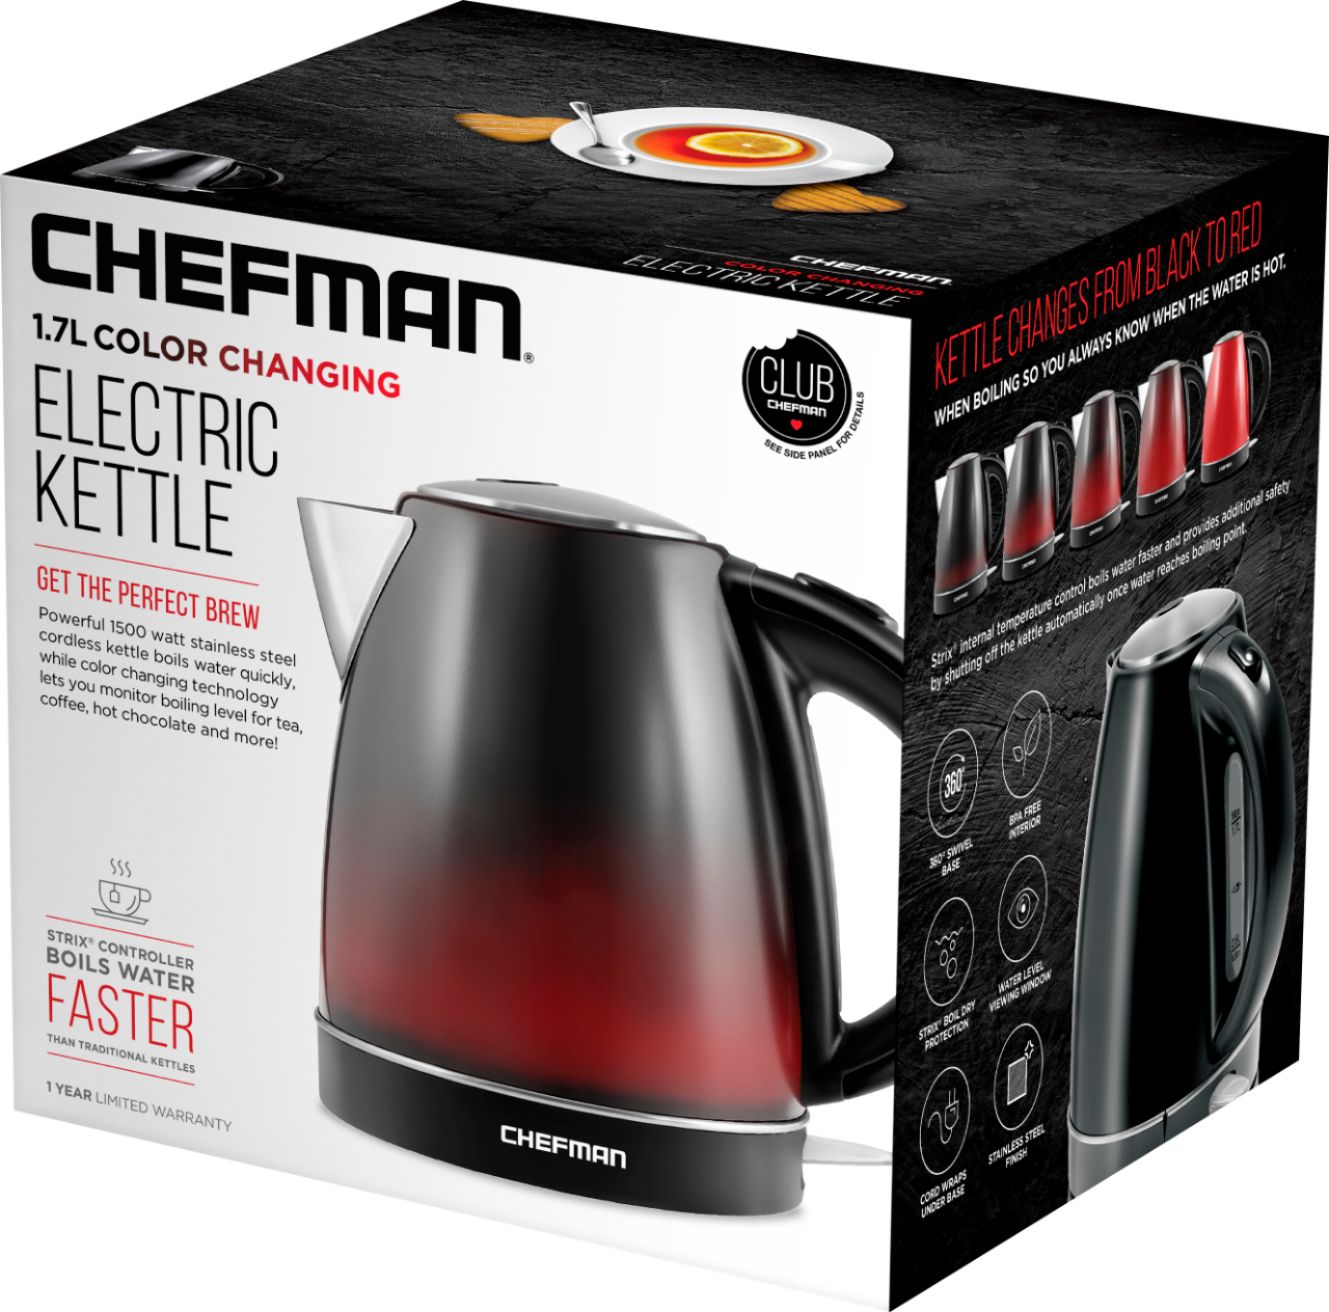 Best Buy: CHEFMAN 1.7L Color Changing Electric Kettle Red/Black/Stainless  Steel RJ11-17-CC